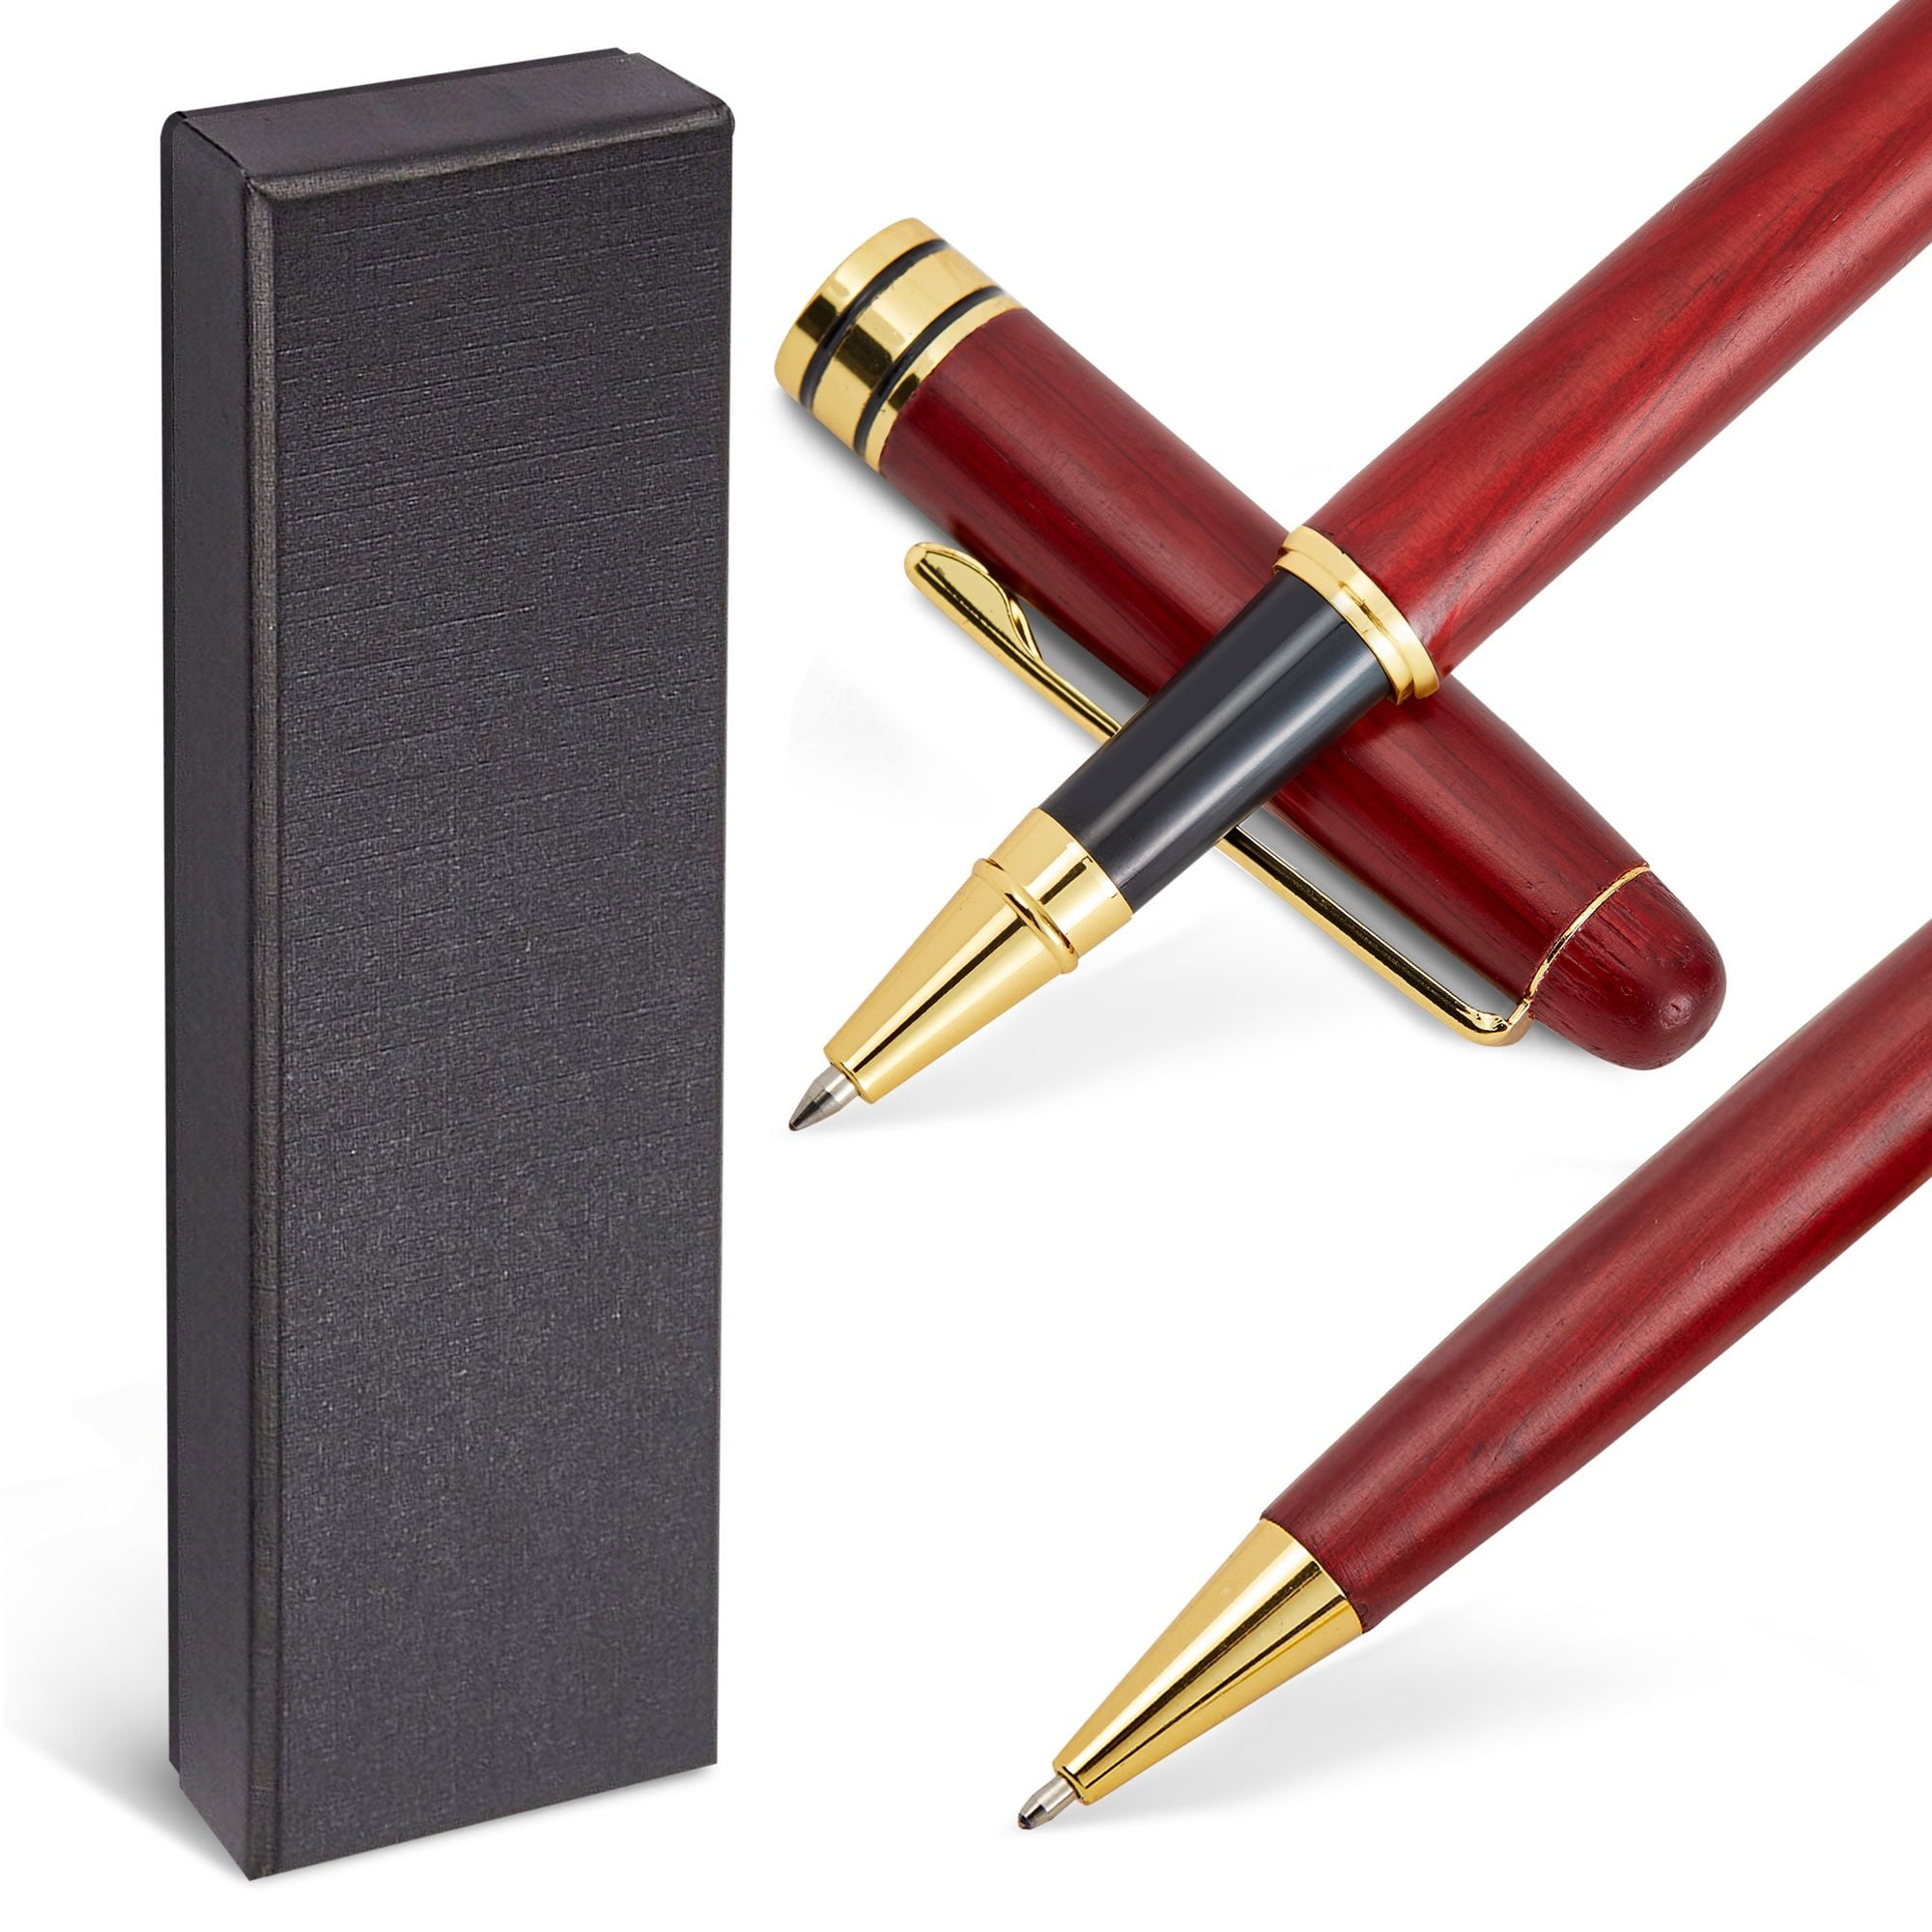 2 Pack Luxury Rosewood Pen Set for Men, Fancy Ballpoint Pens with Black Ink  Refills, Gift Boxed for Executives, Business, and Office Use